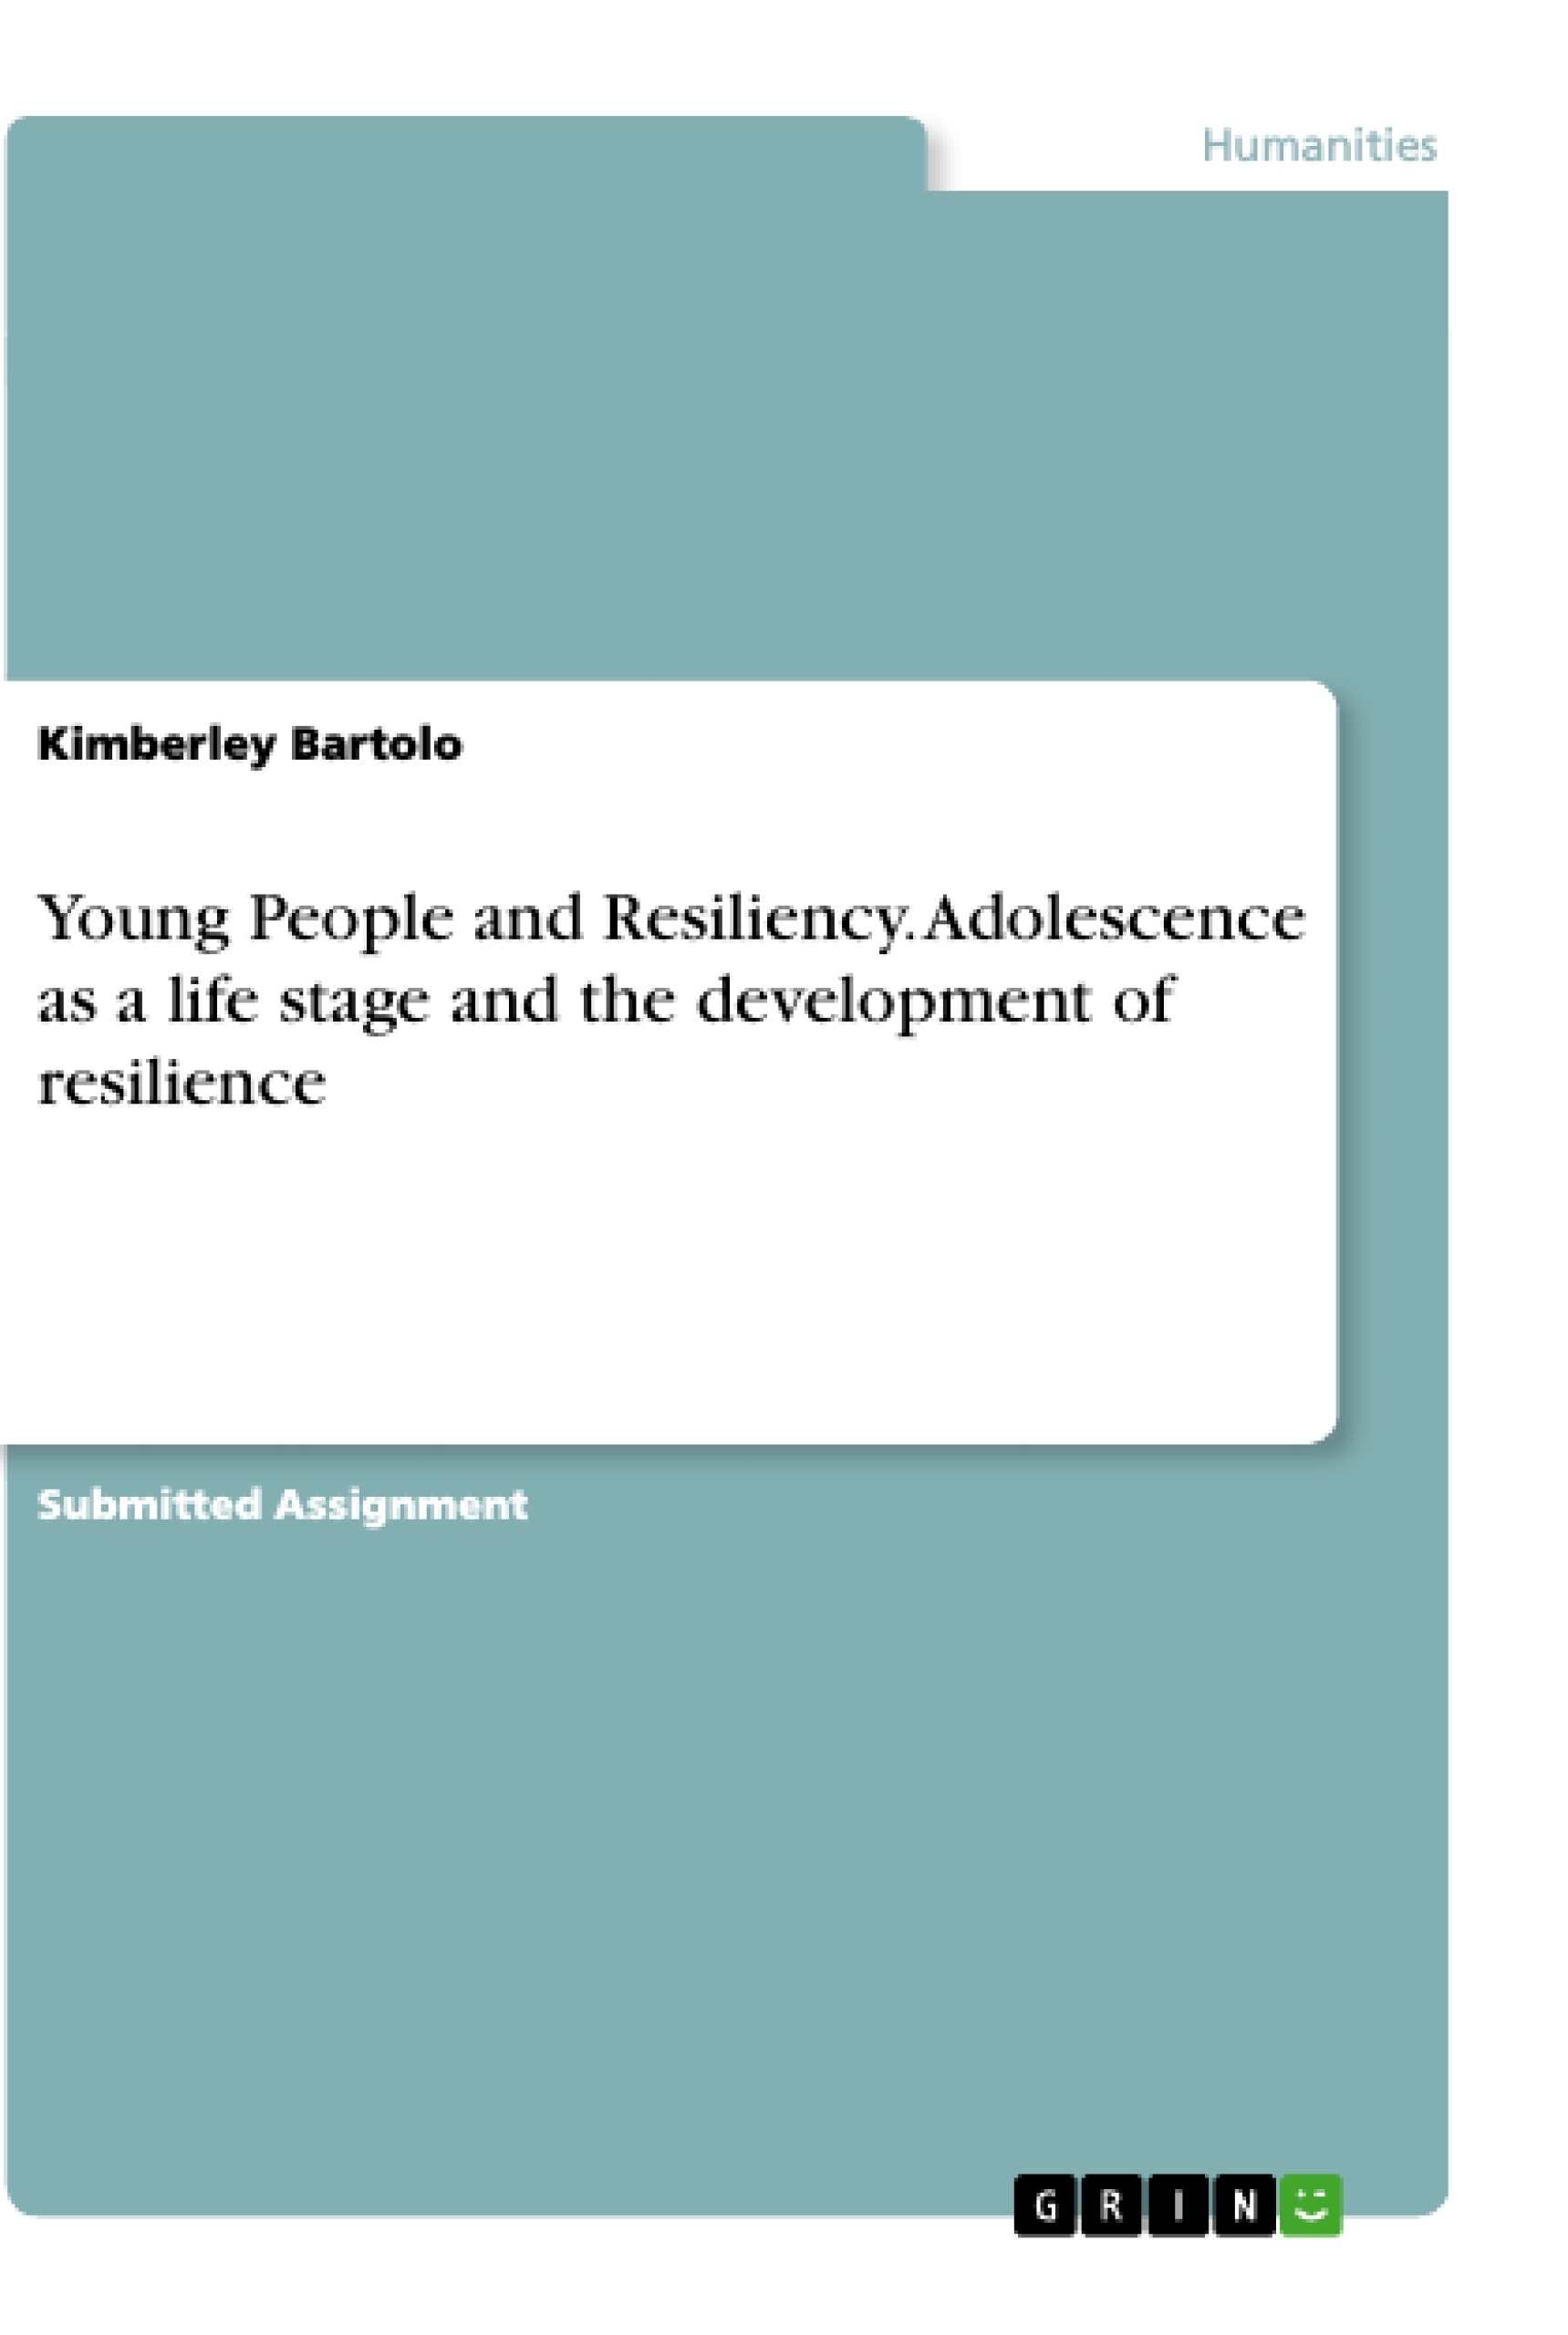 Title: Young People and Resiliency. Adolescence as a life stage and the development of resilience